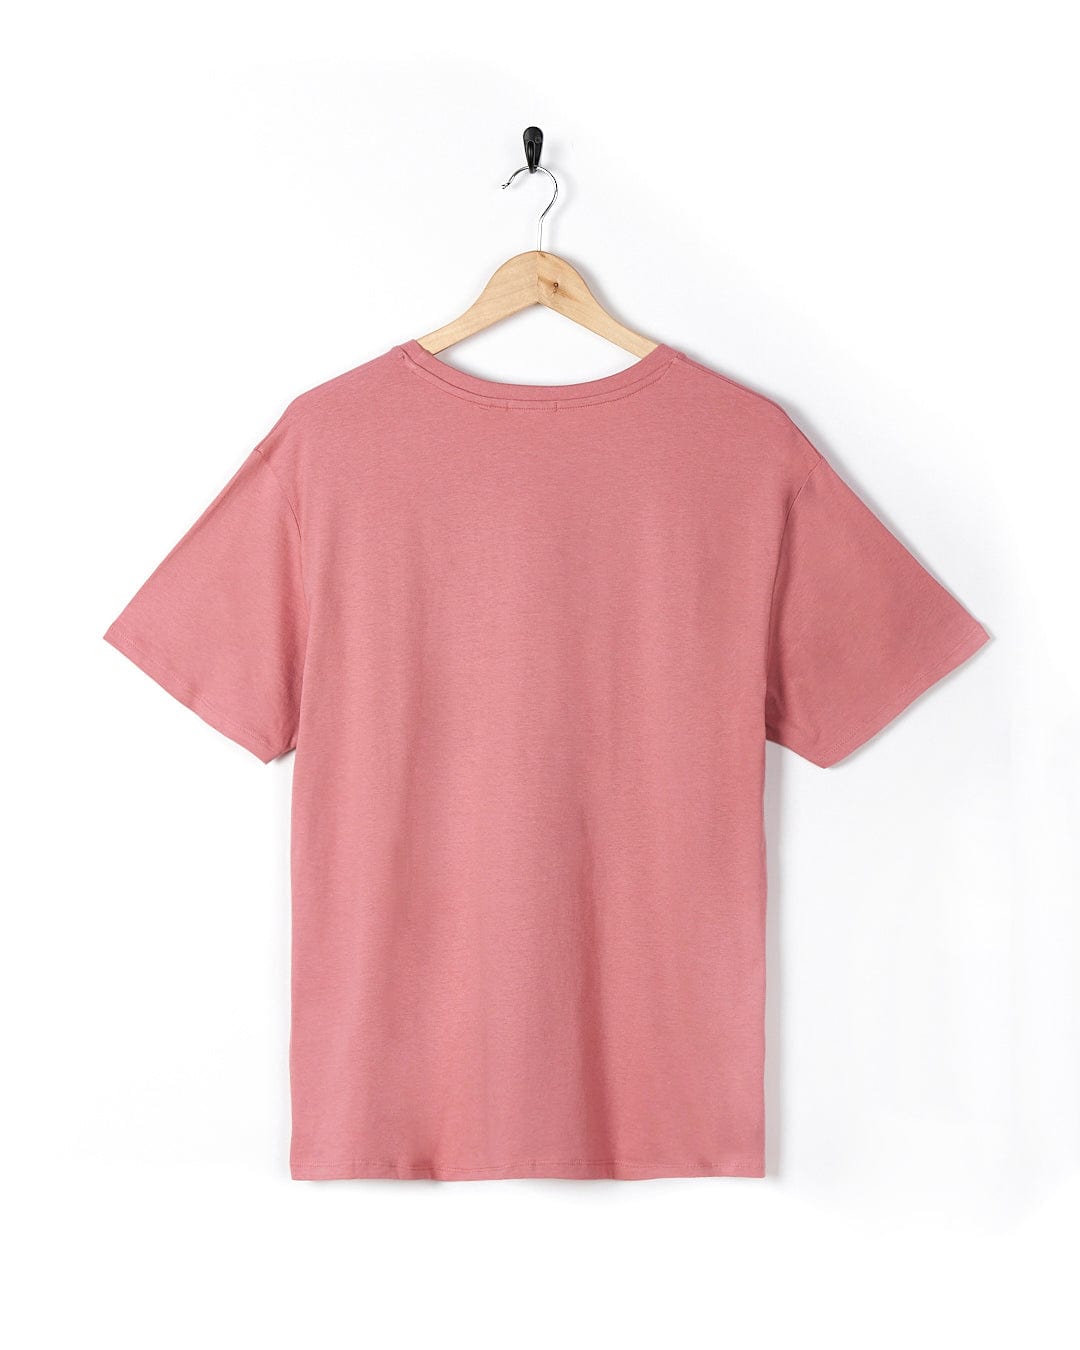 A Sea Shells - Womens Relaxed Fit T-Shirt - Mid Pink by Saltrock hanging on a wooden hanger.